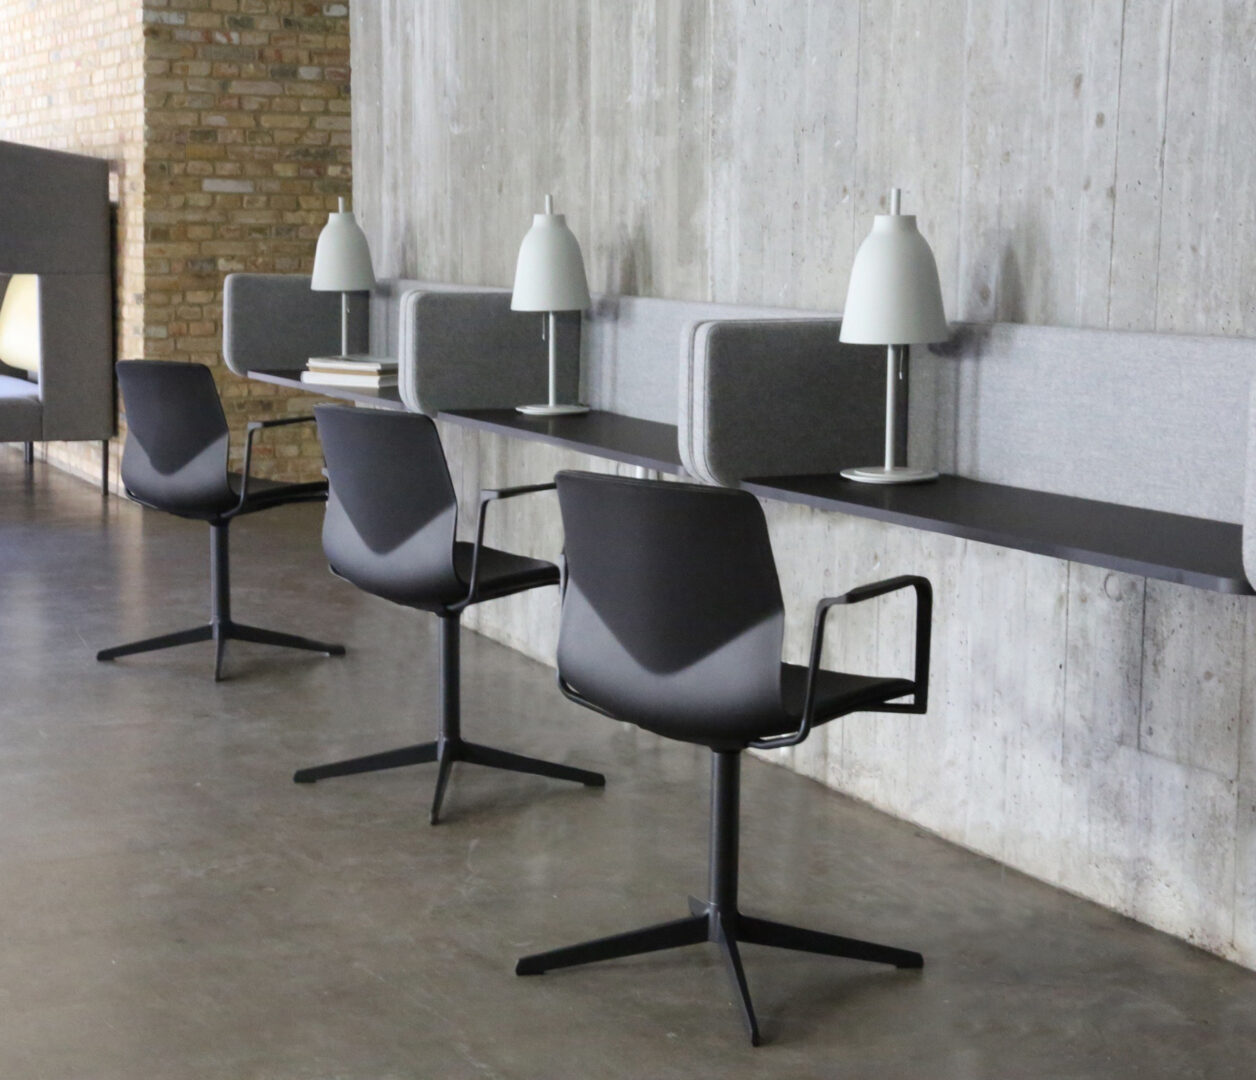 OCEE&FOUR – Chairs – FourCast 2 Evo – Lifestyle Image 7